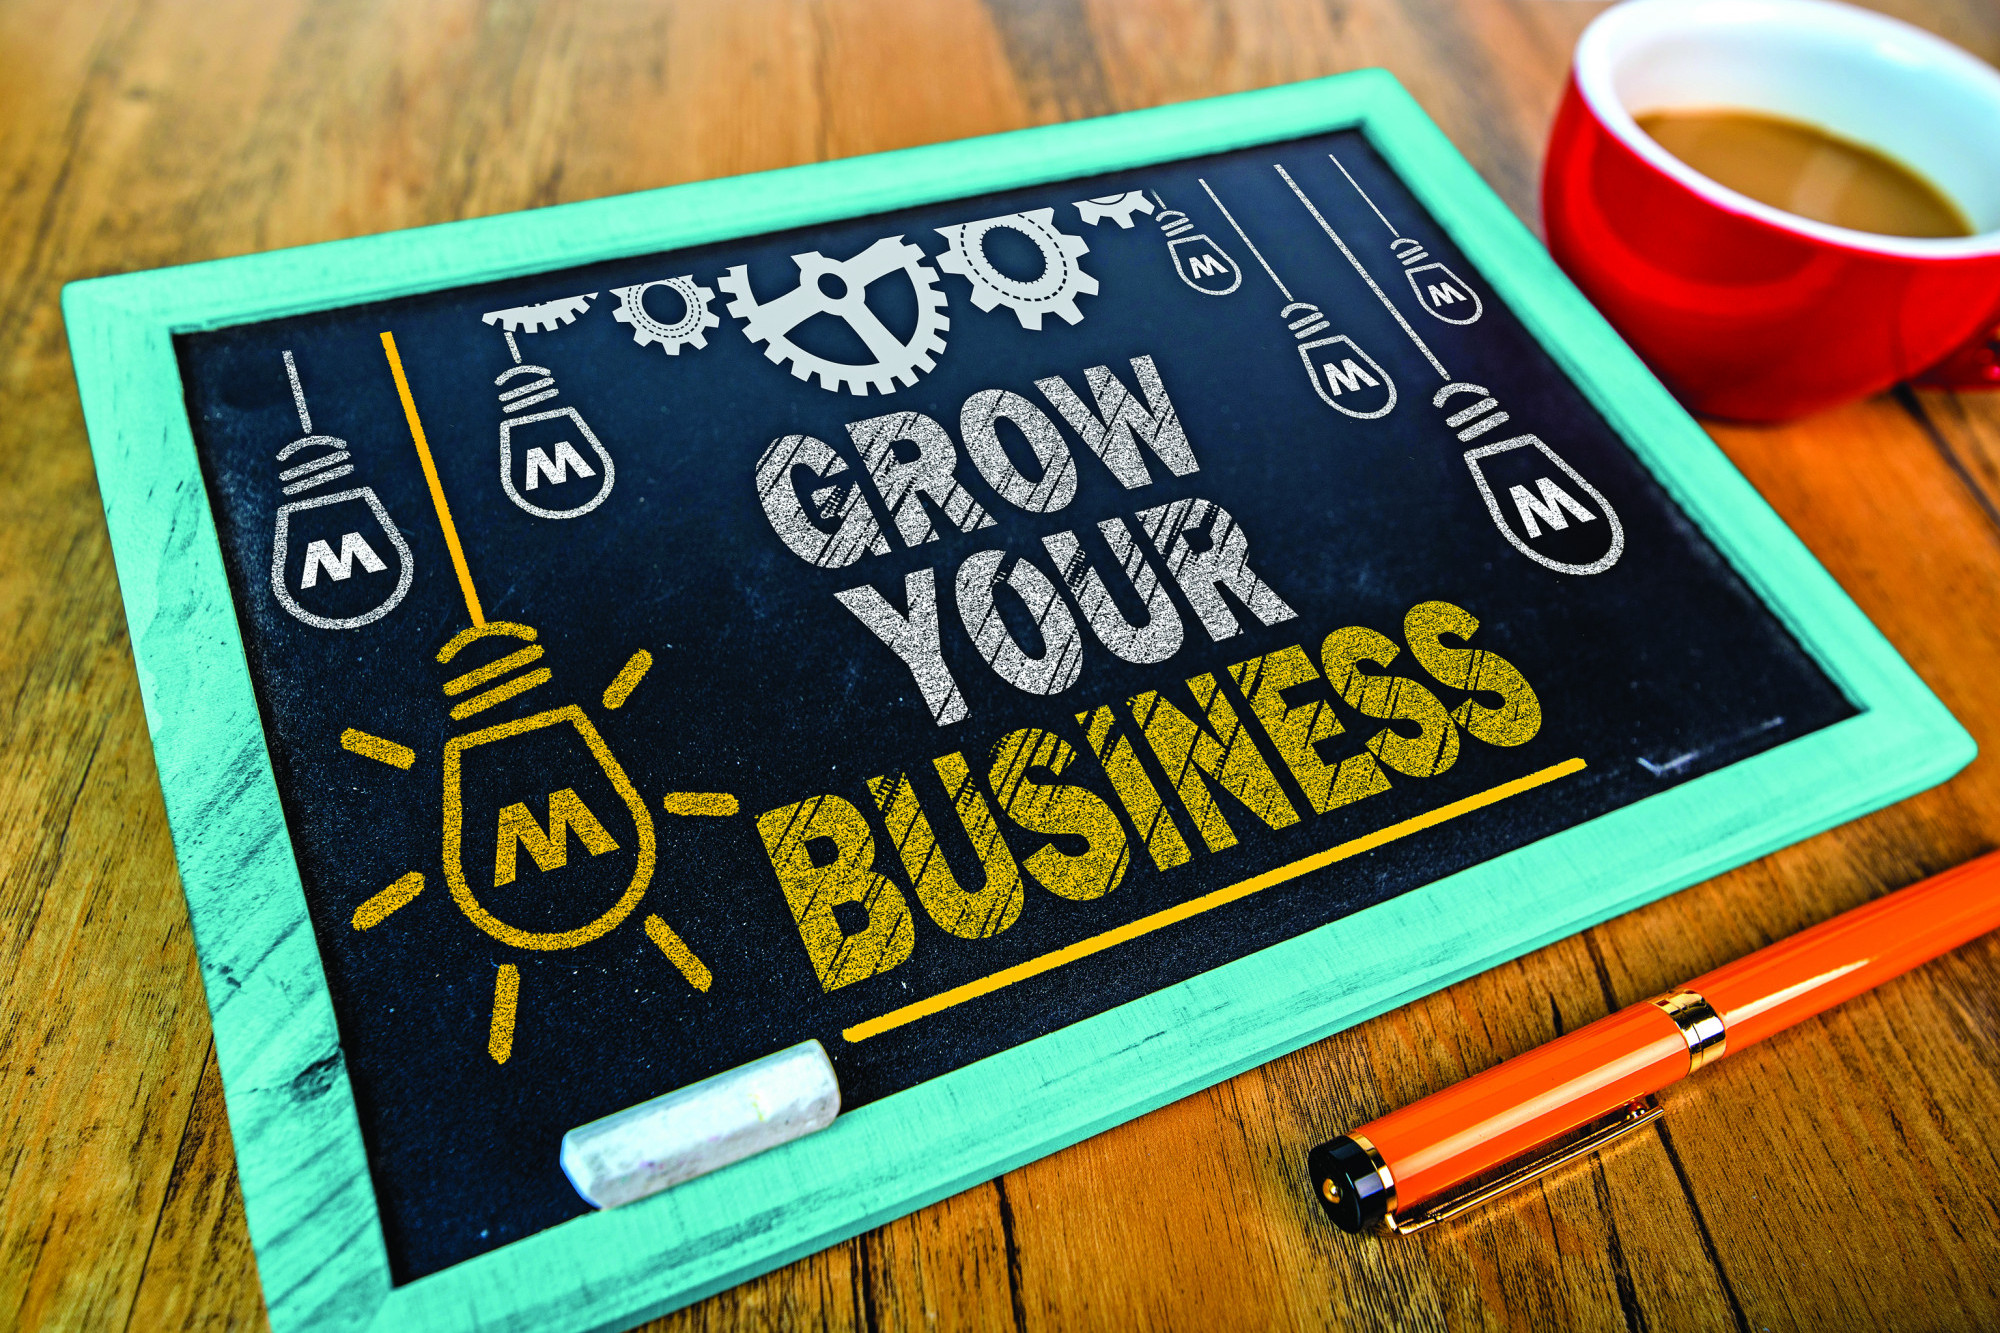 5 simple marketing tips to grow your business - feature photo